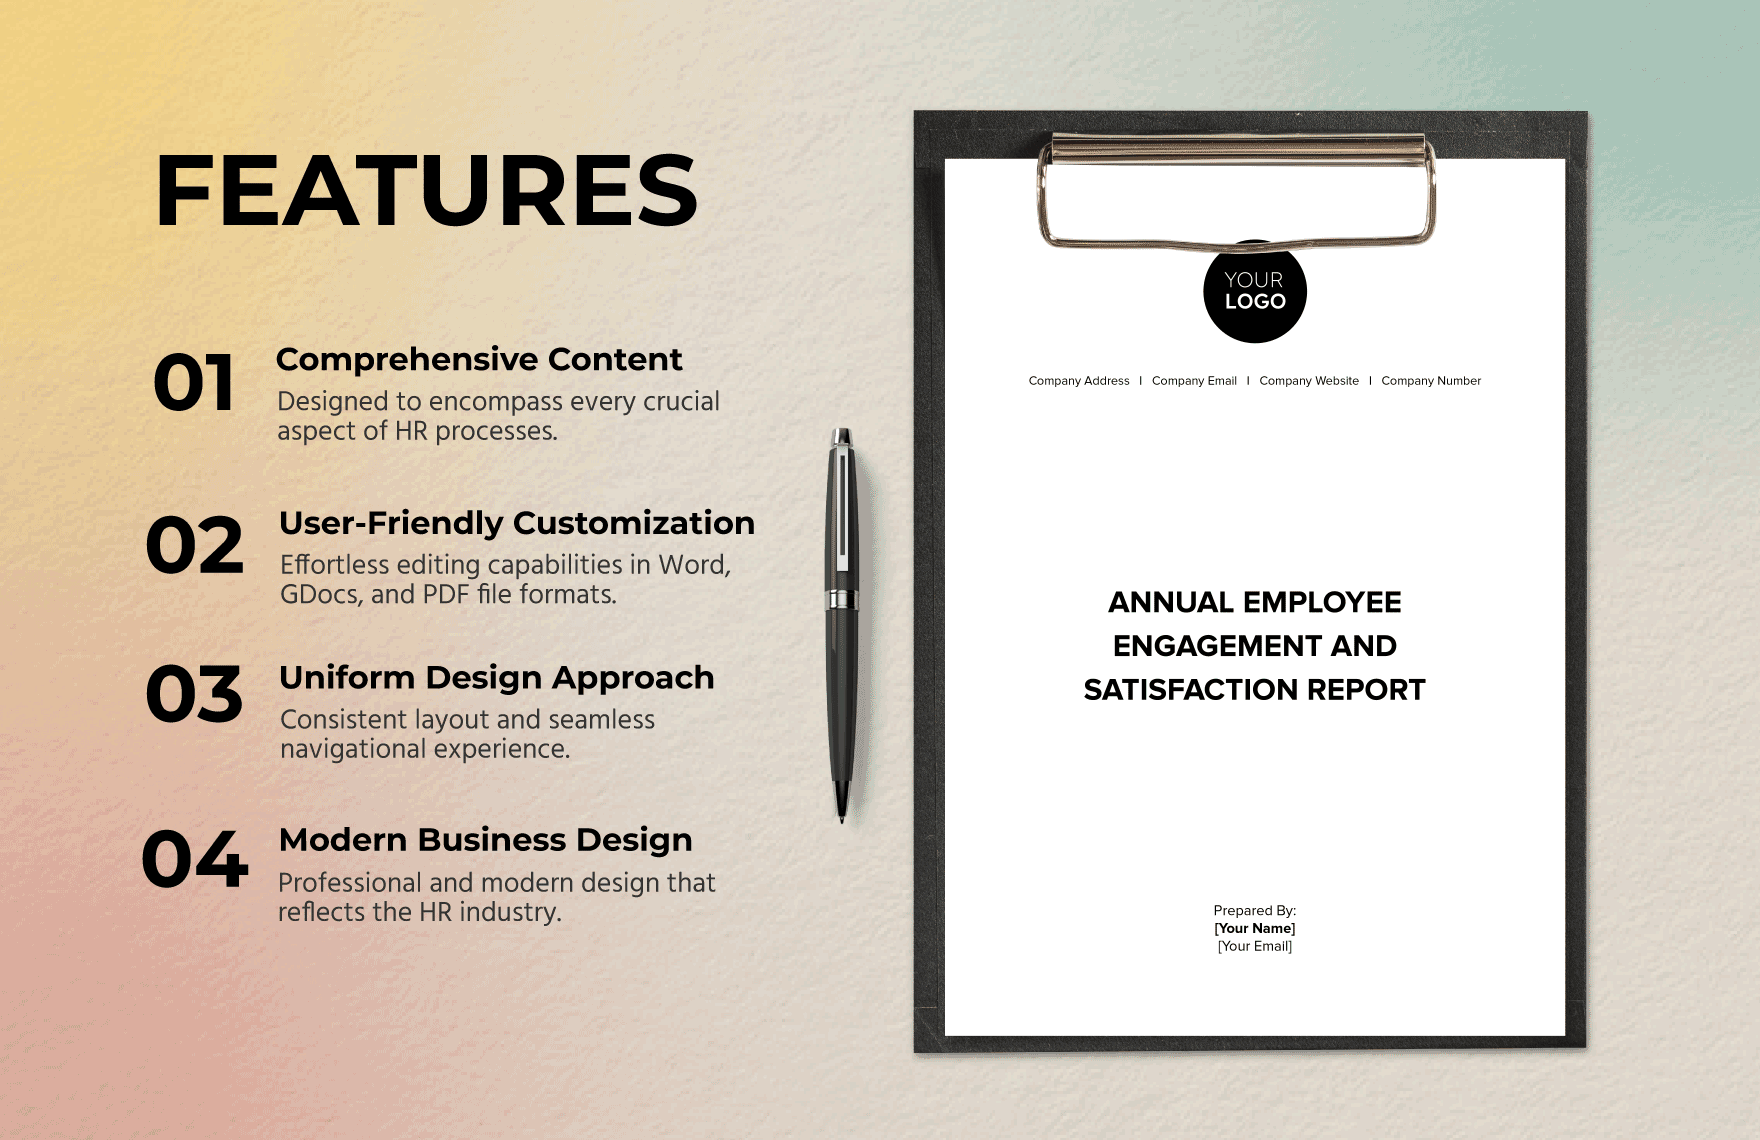 Annual Employee Engagement and Satisfaction Report HR Template